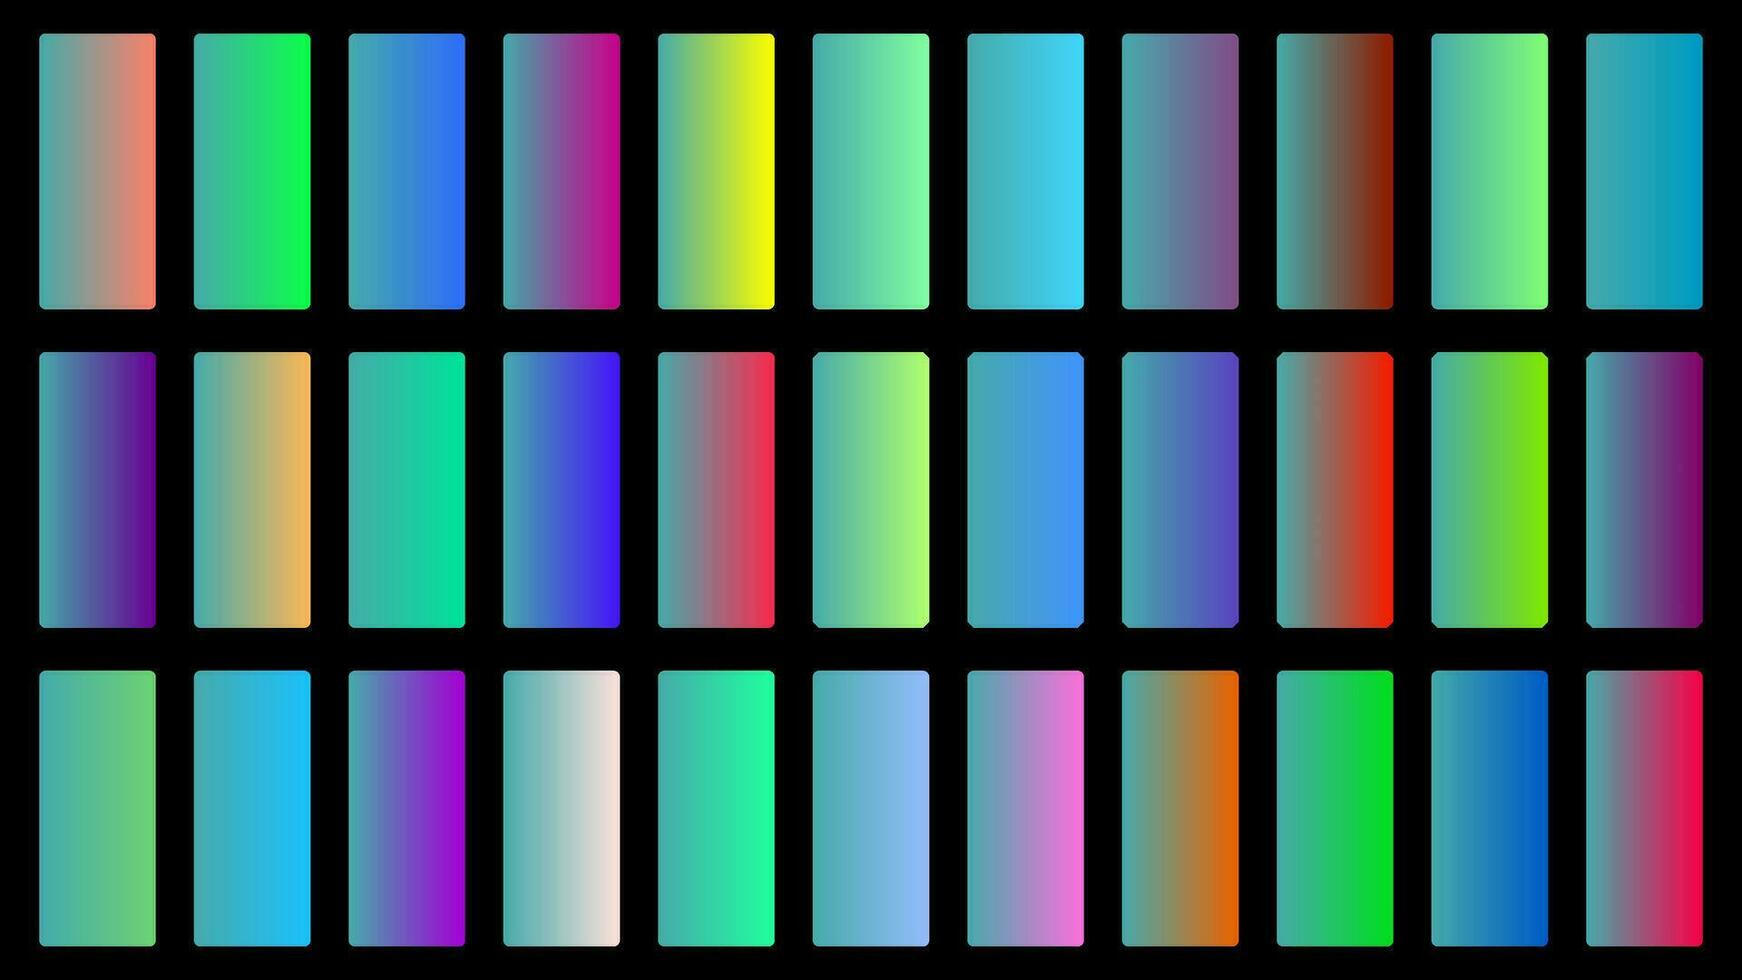 Colorful Teal Color Shade Linear Gradient Palette Swatches Web Kit Rounded Rectangles Template Set vector